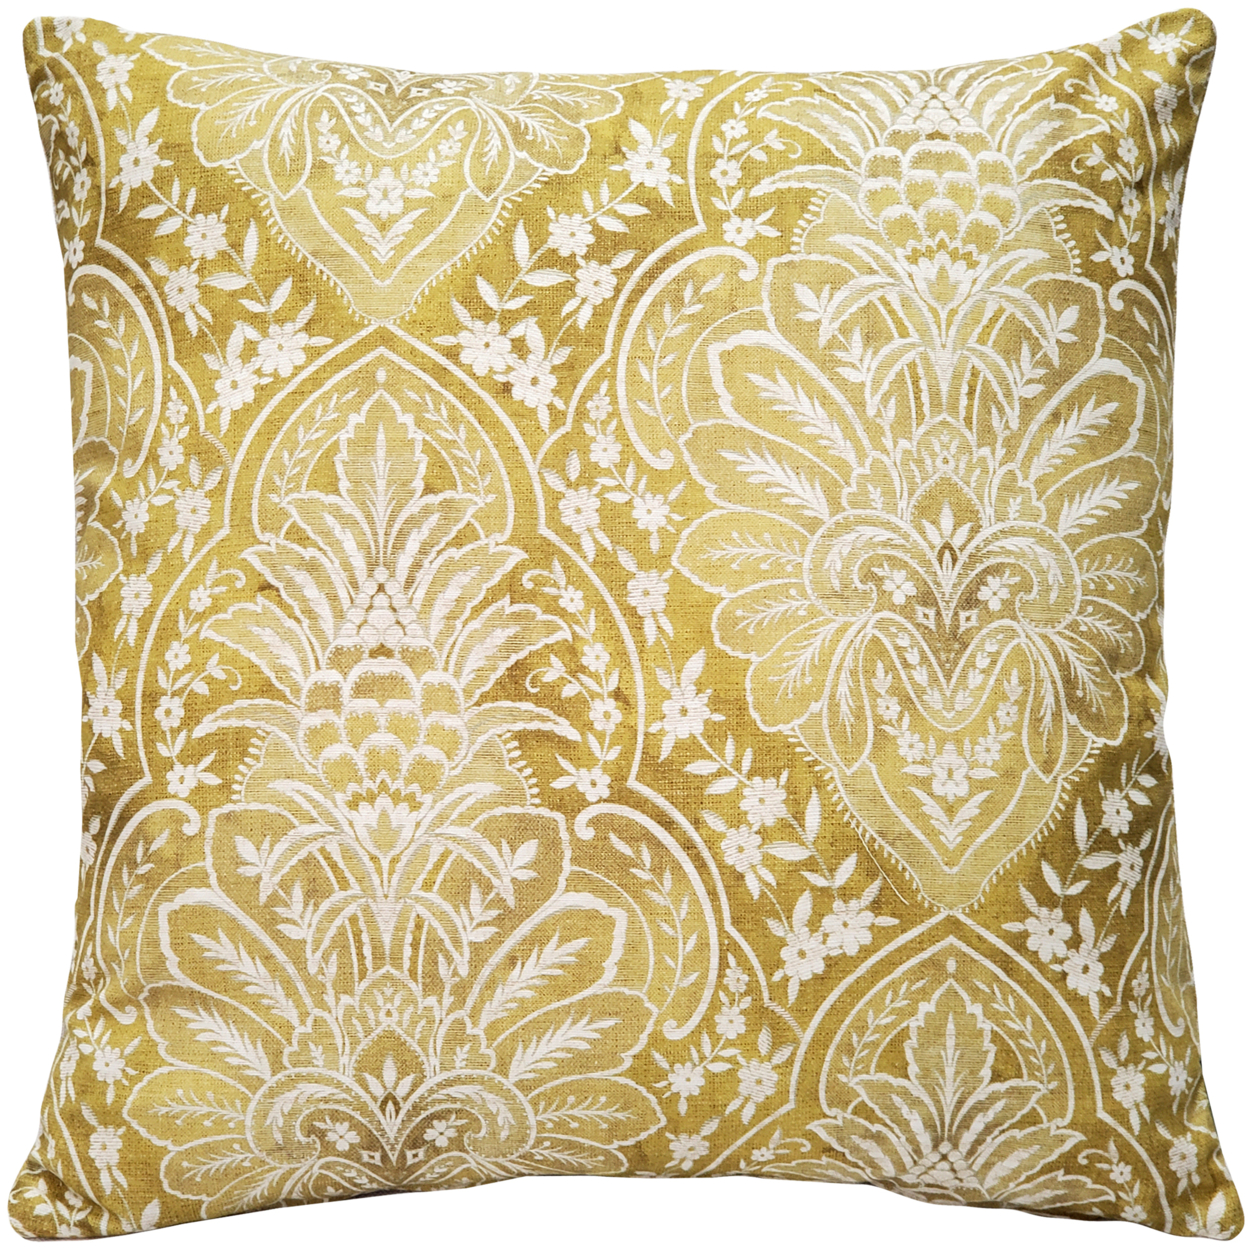 Leone Damask Dijon Yellow Throw Pillow 21x21 Inches Square, Complete Pillow With Polyfill Pillow Insert